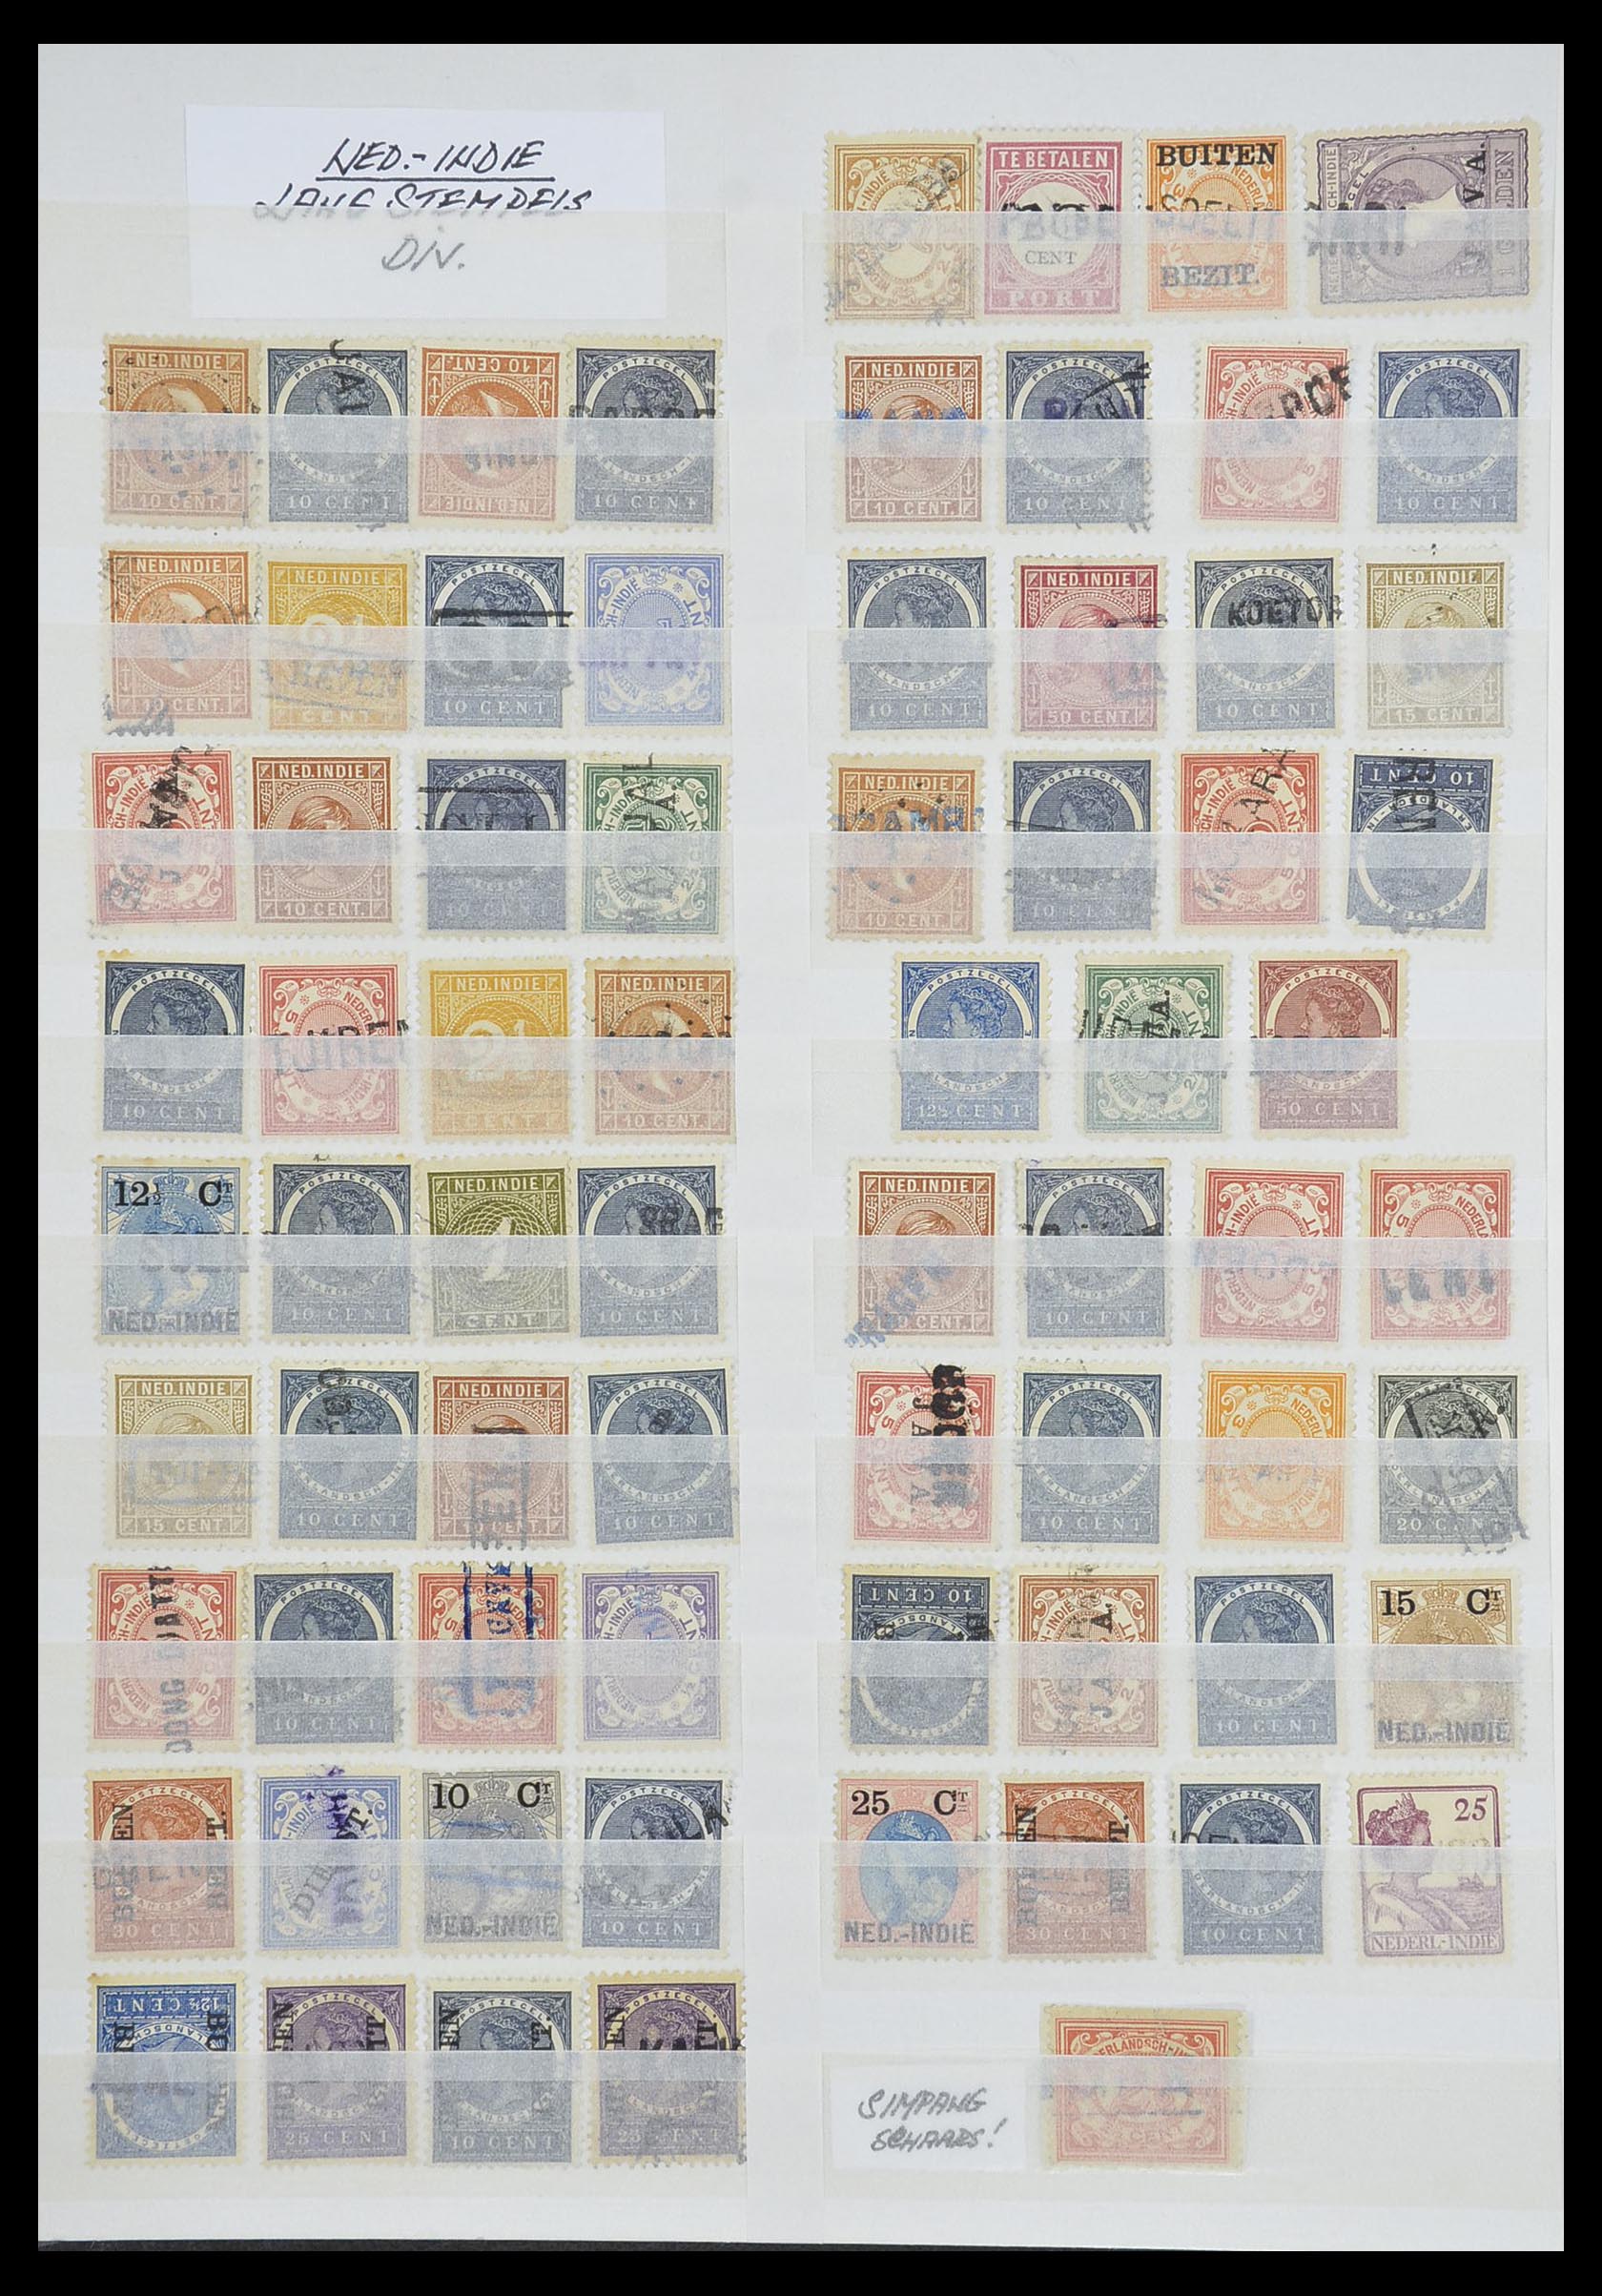 33718 012 - Stamp collection 33718 Dutch east Indies cancels.